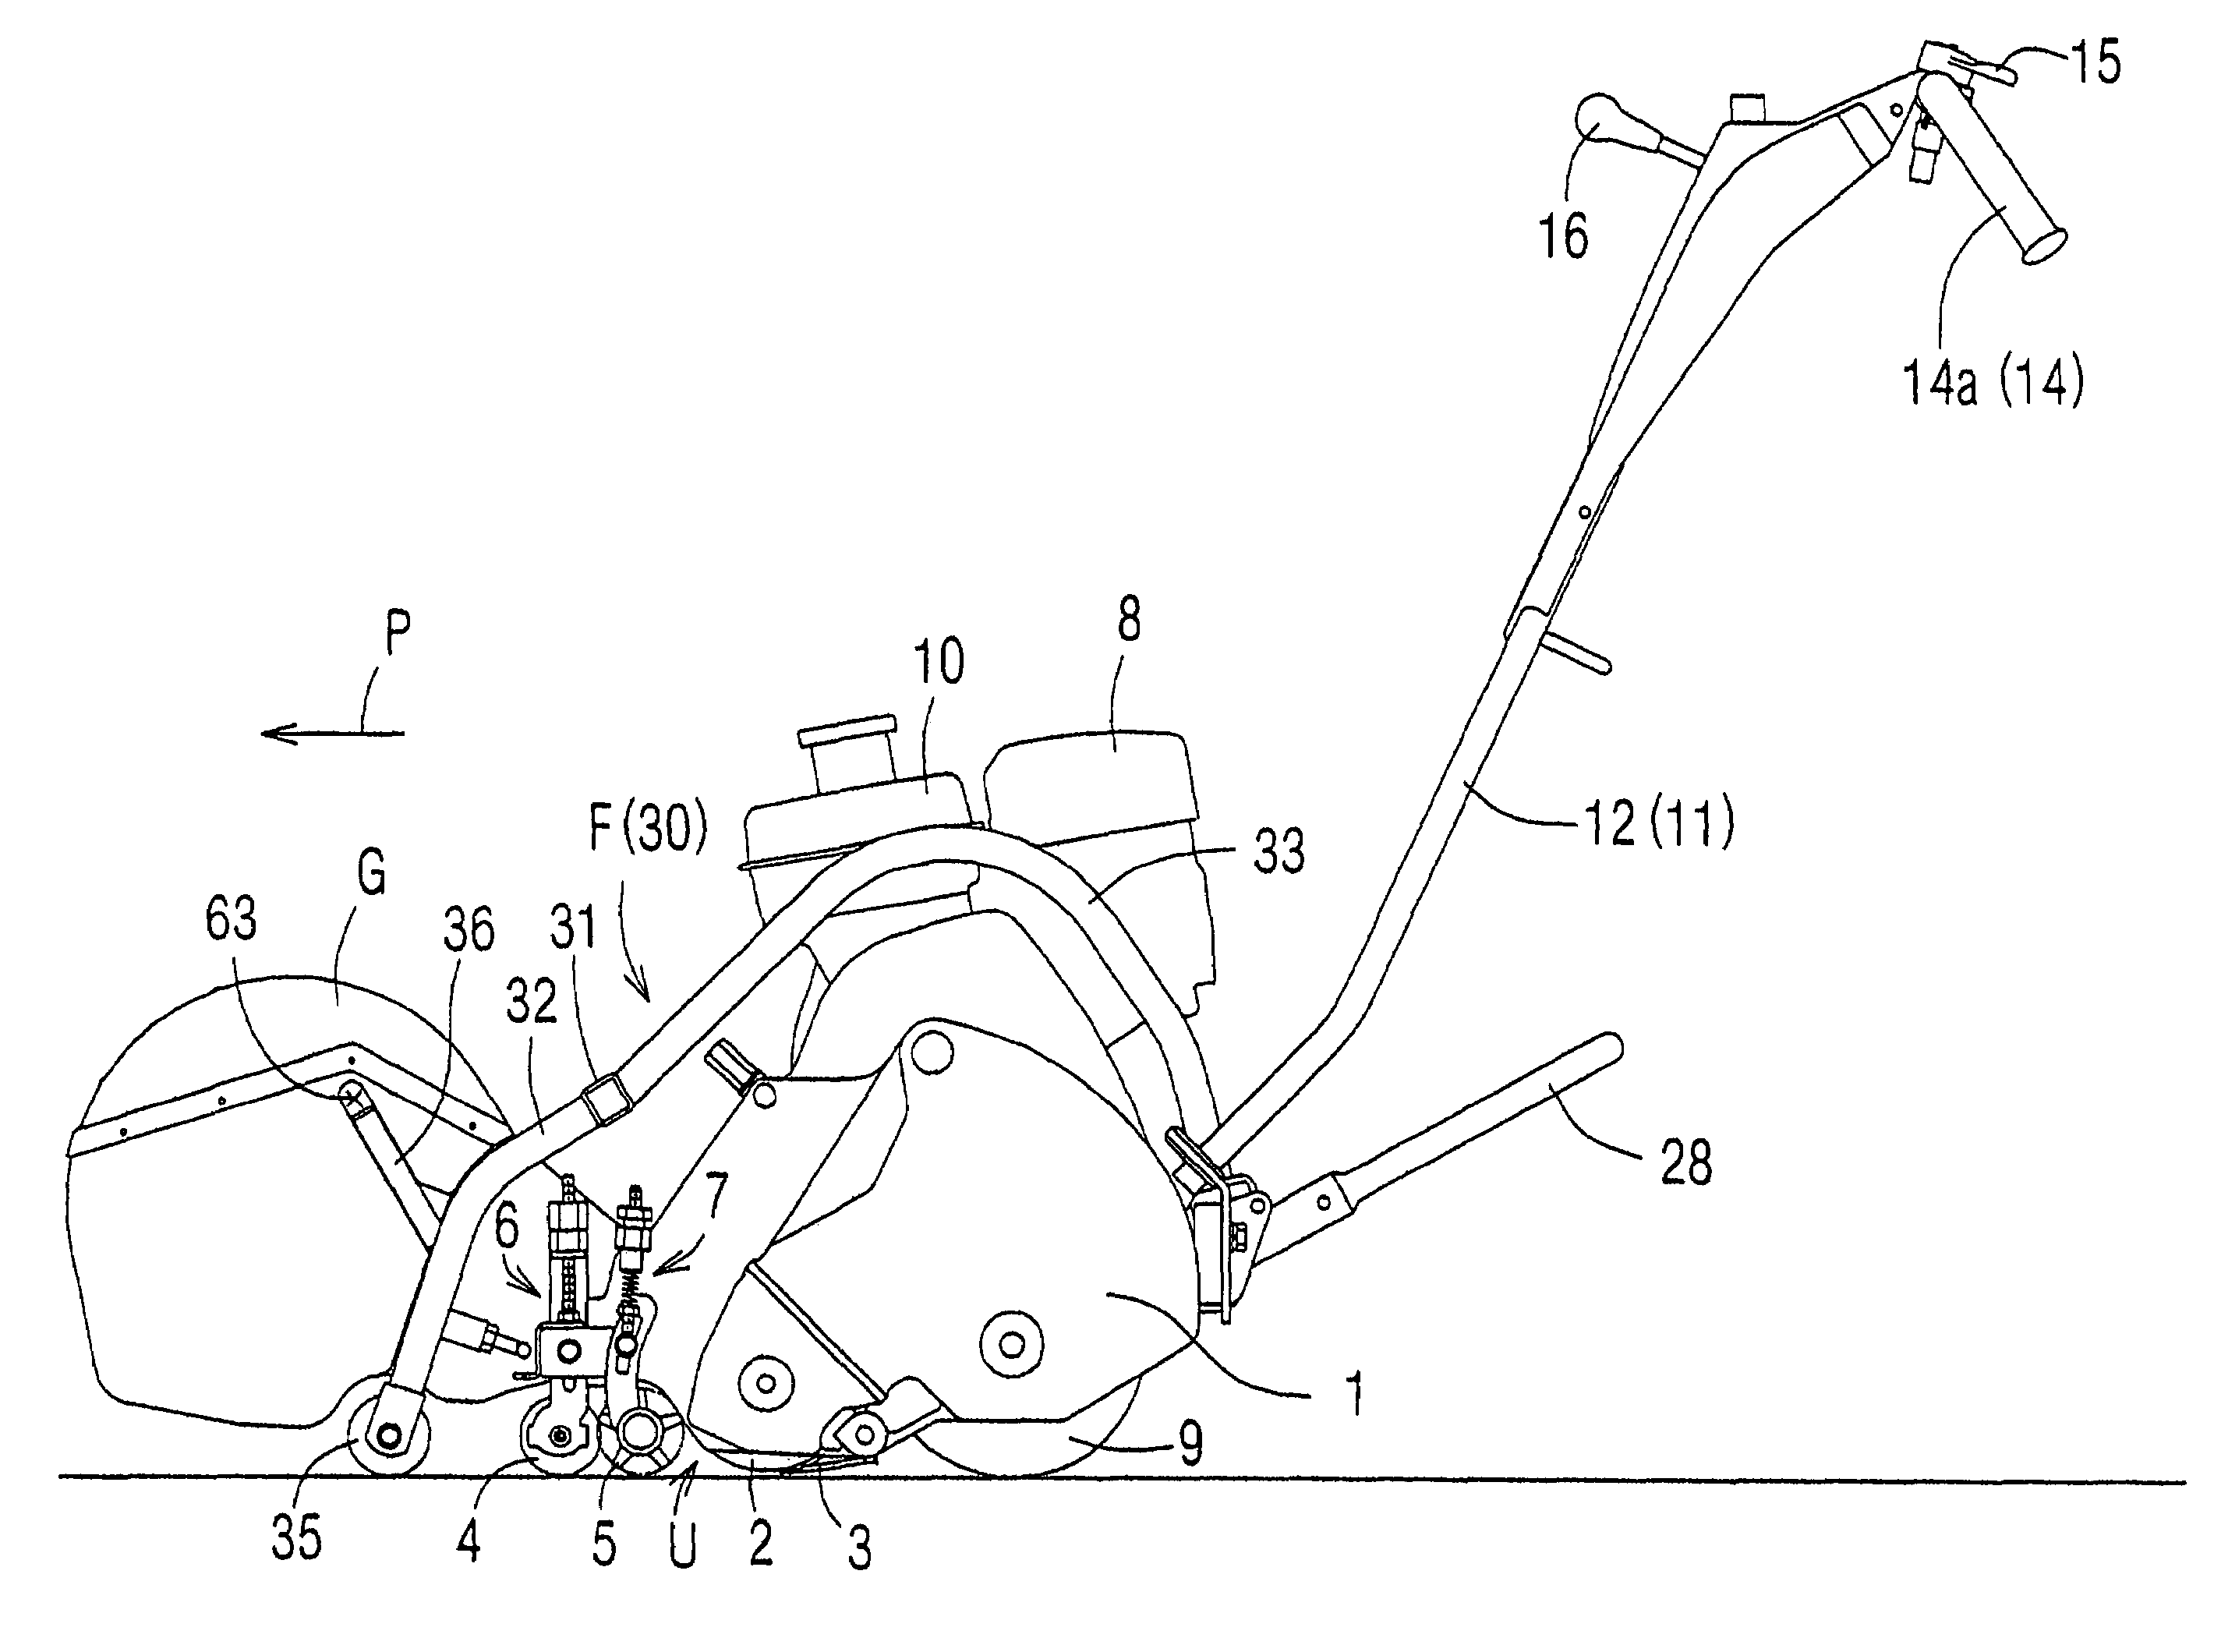 Walk-type lawn mower and catcher frame apparatus